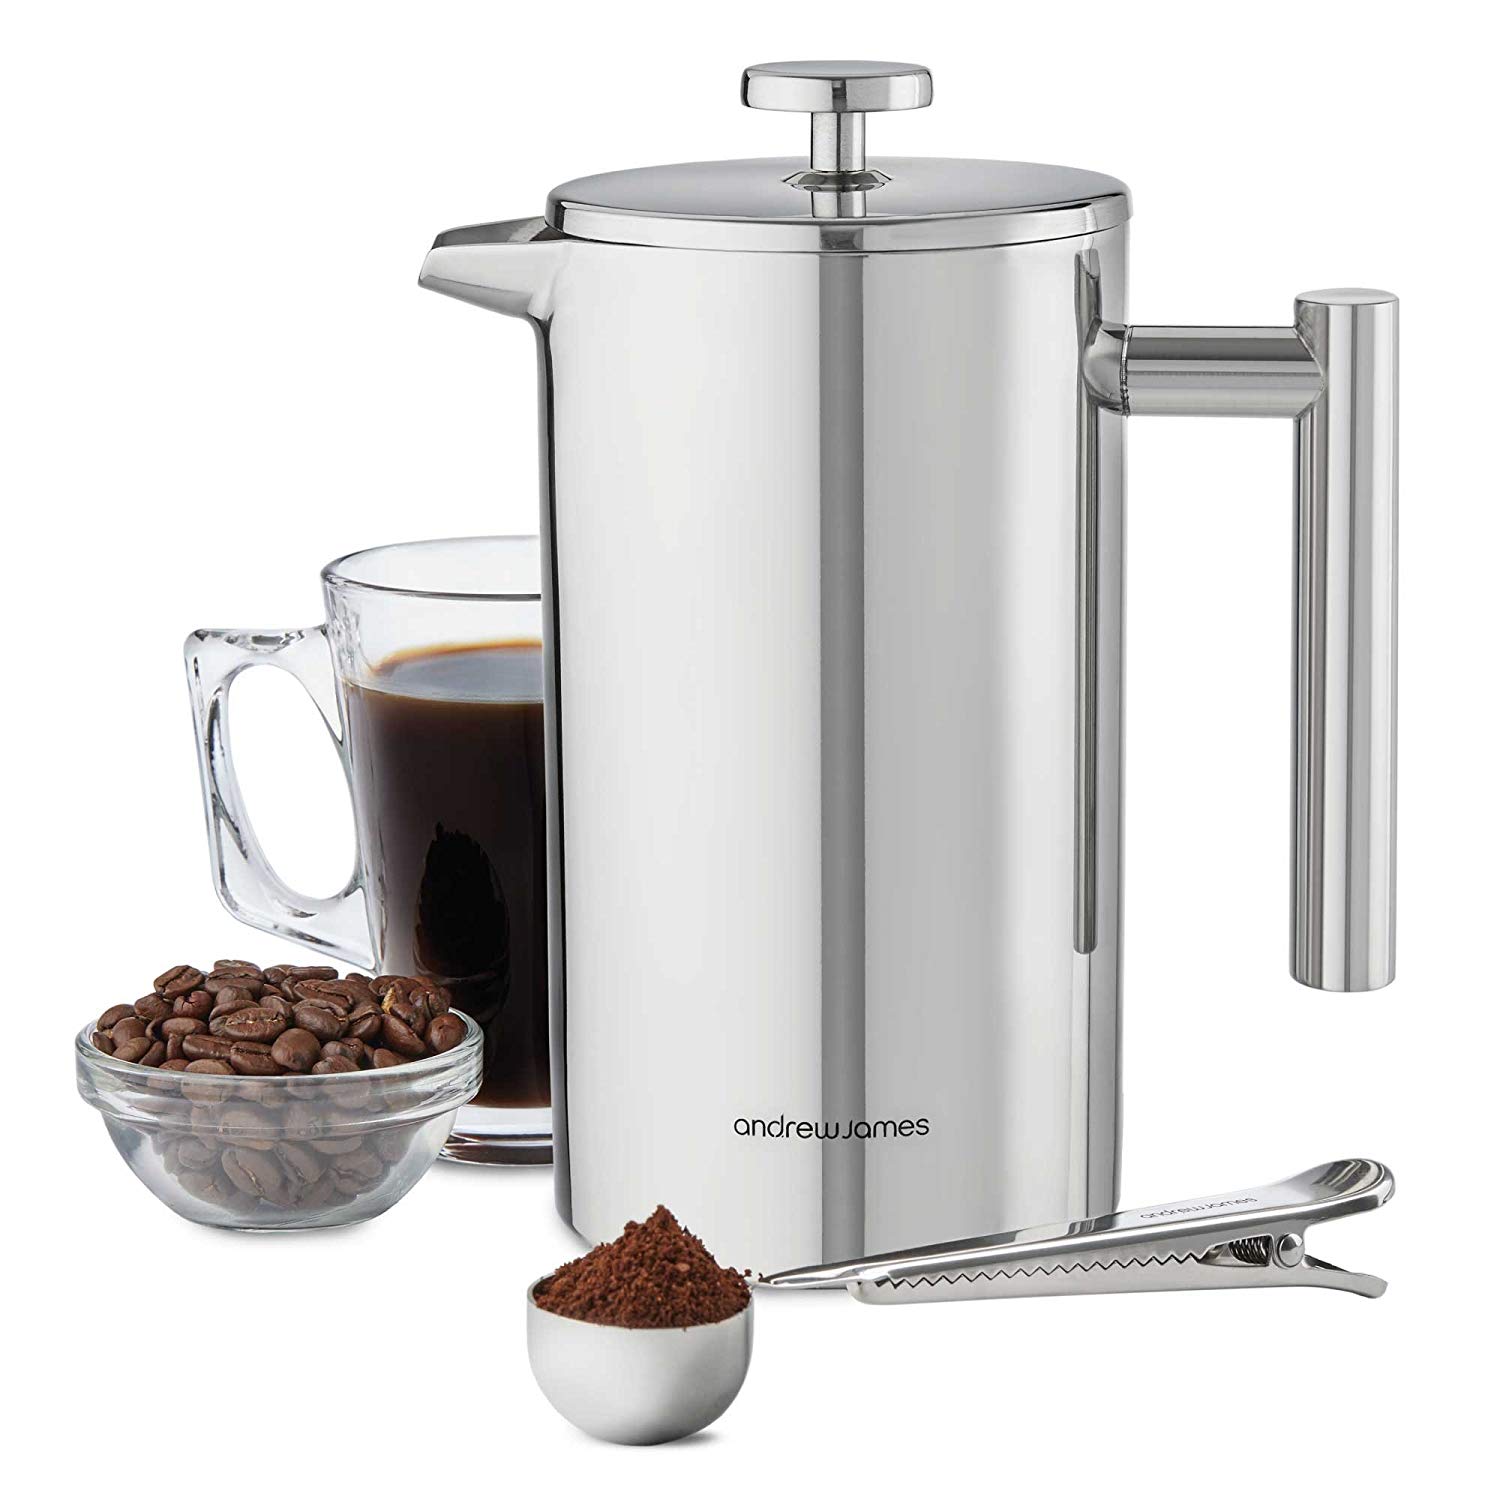 Andrew James Stainless Steel Coffee Press